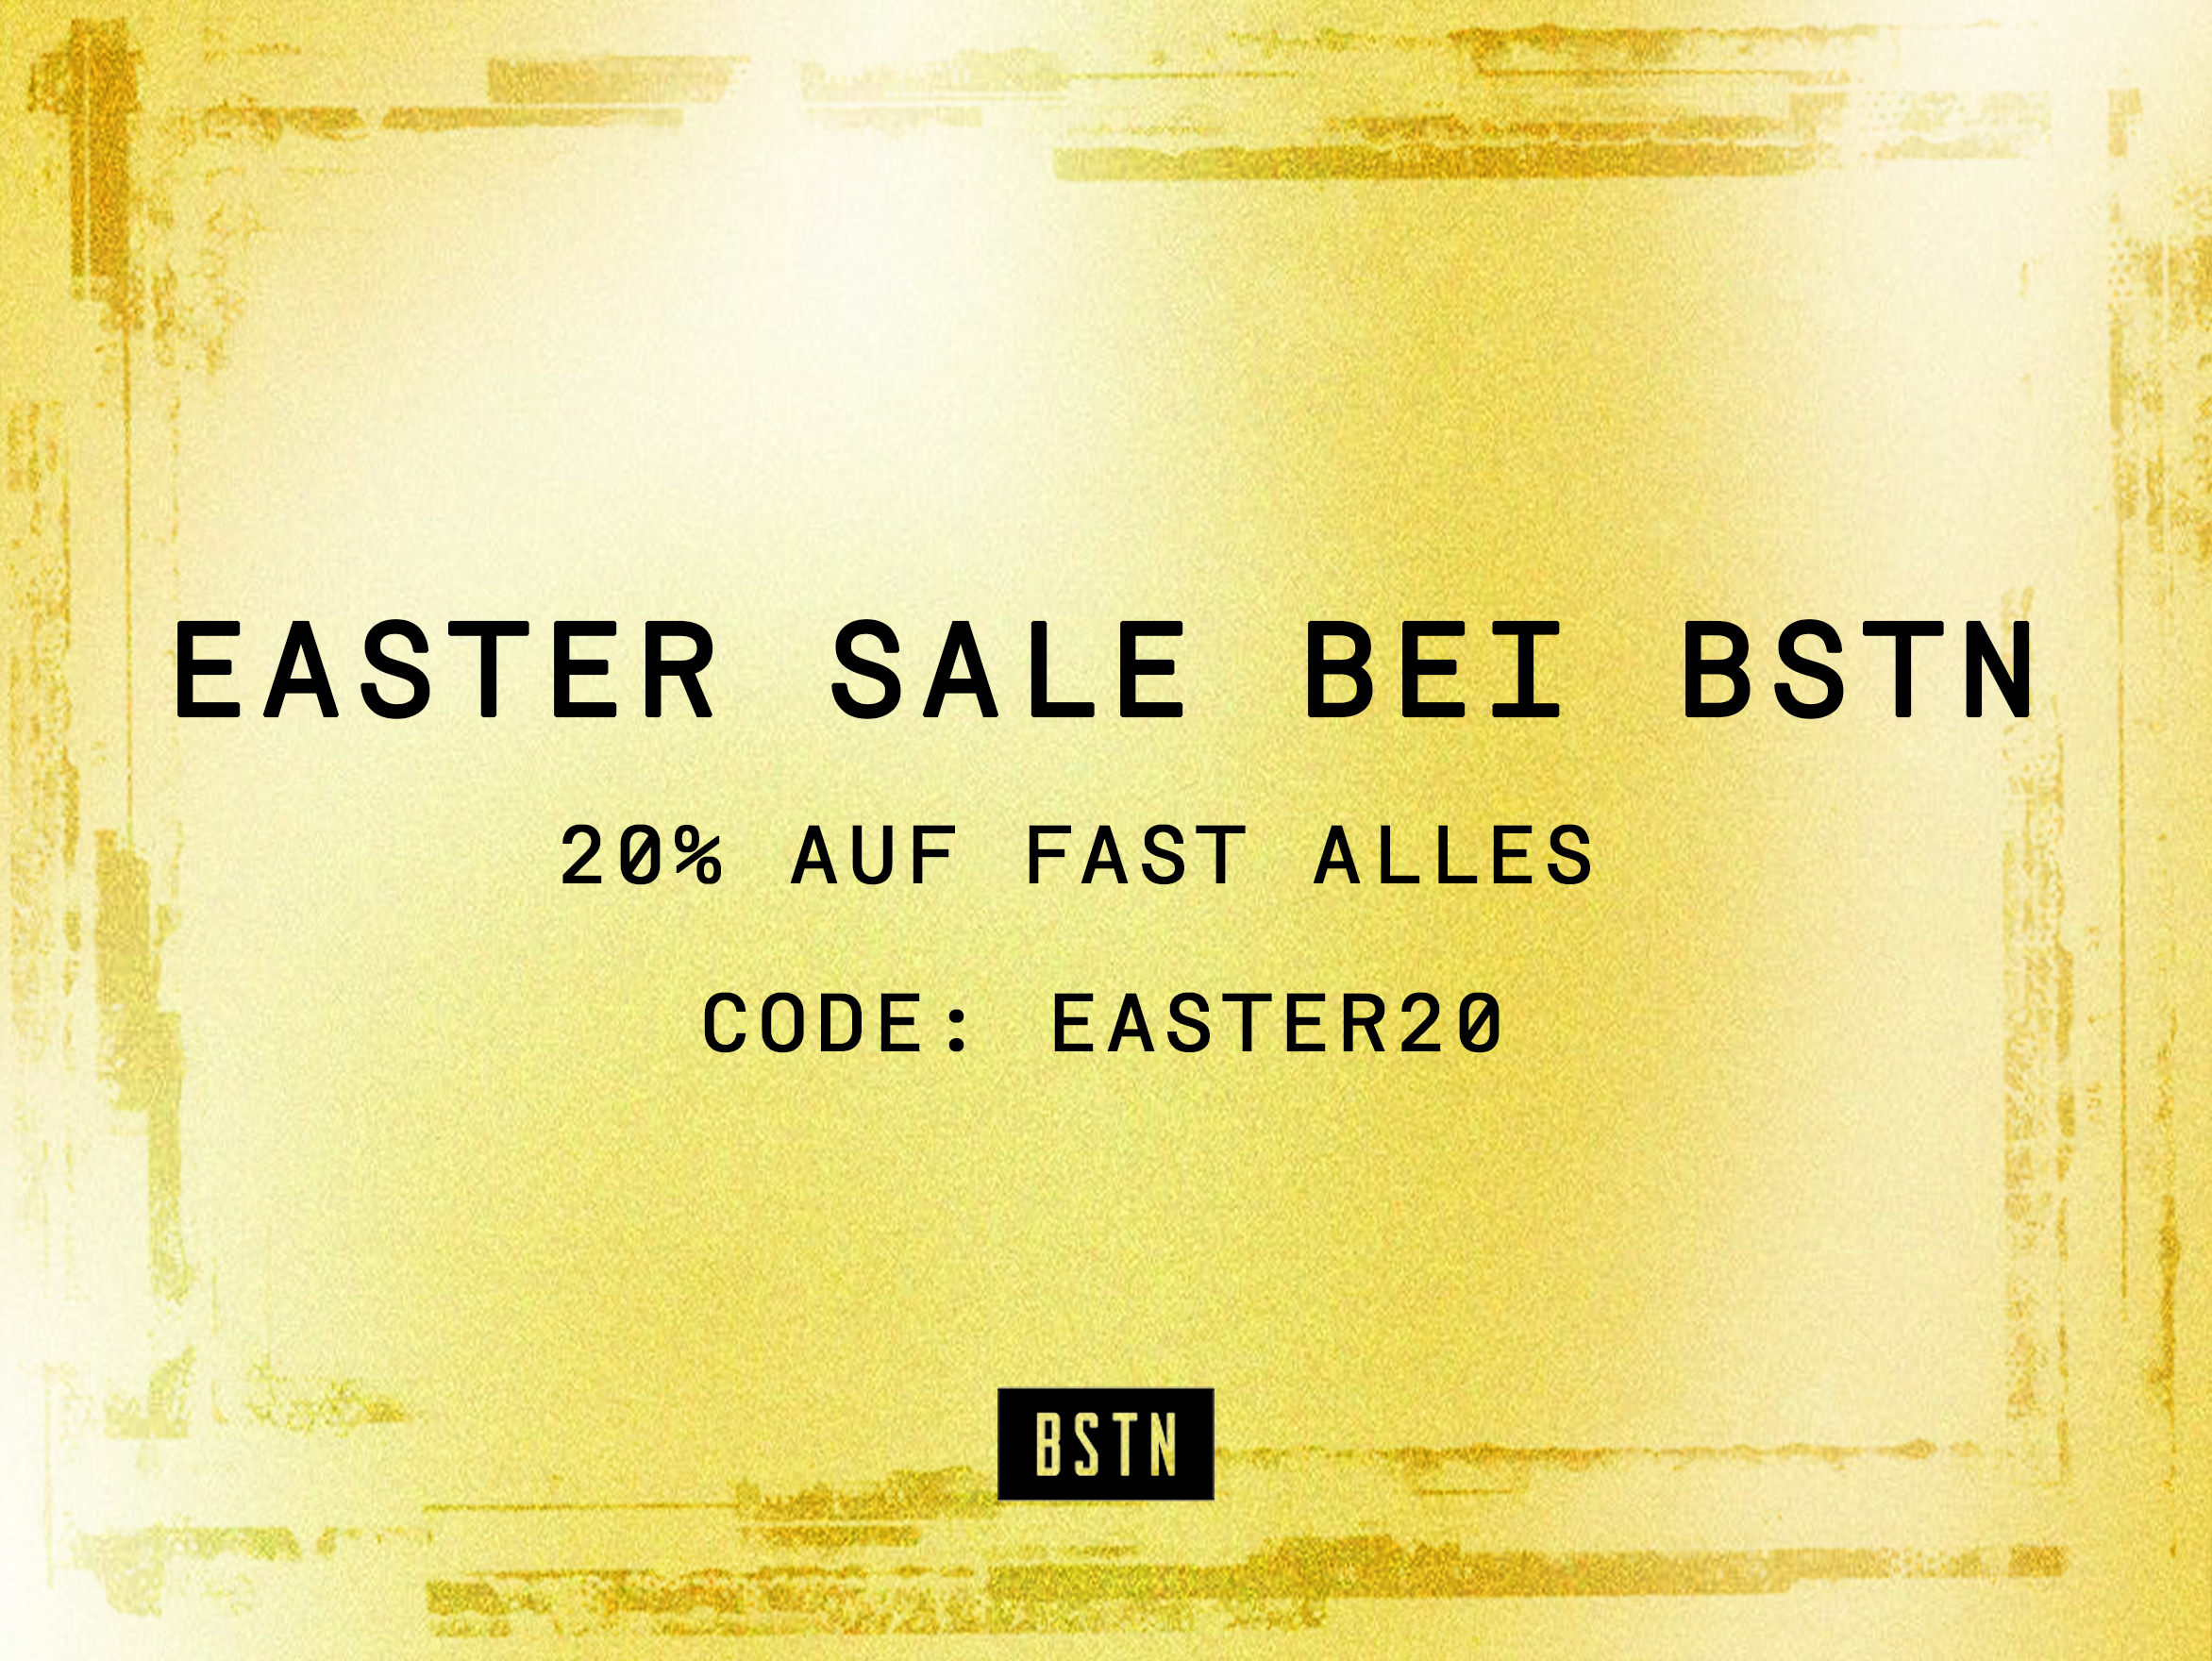 BSTN Easter Sale – 20% off auf fast chineses